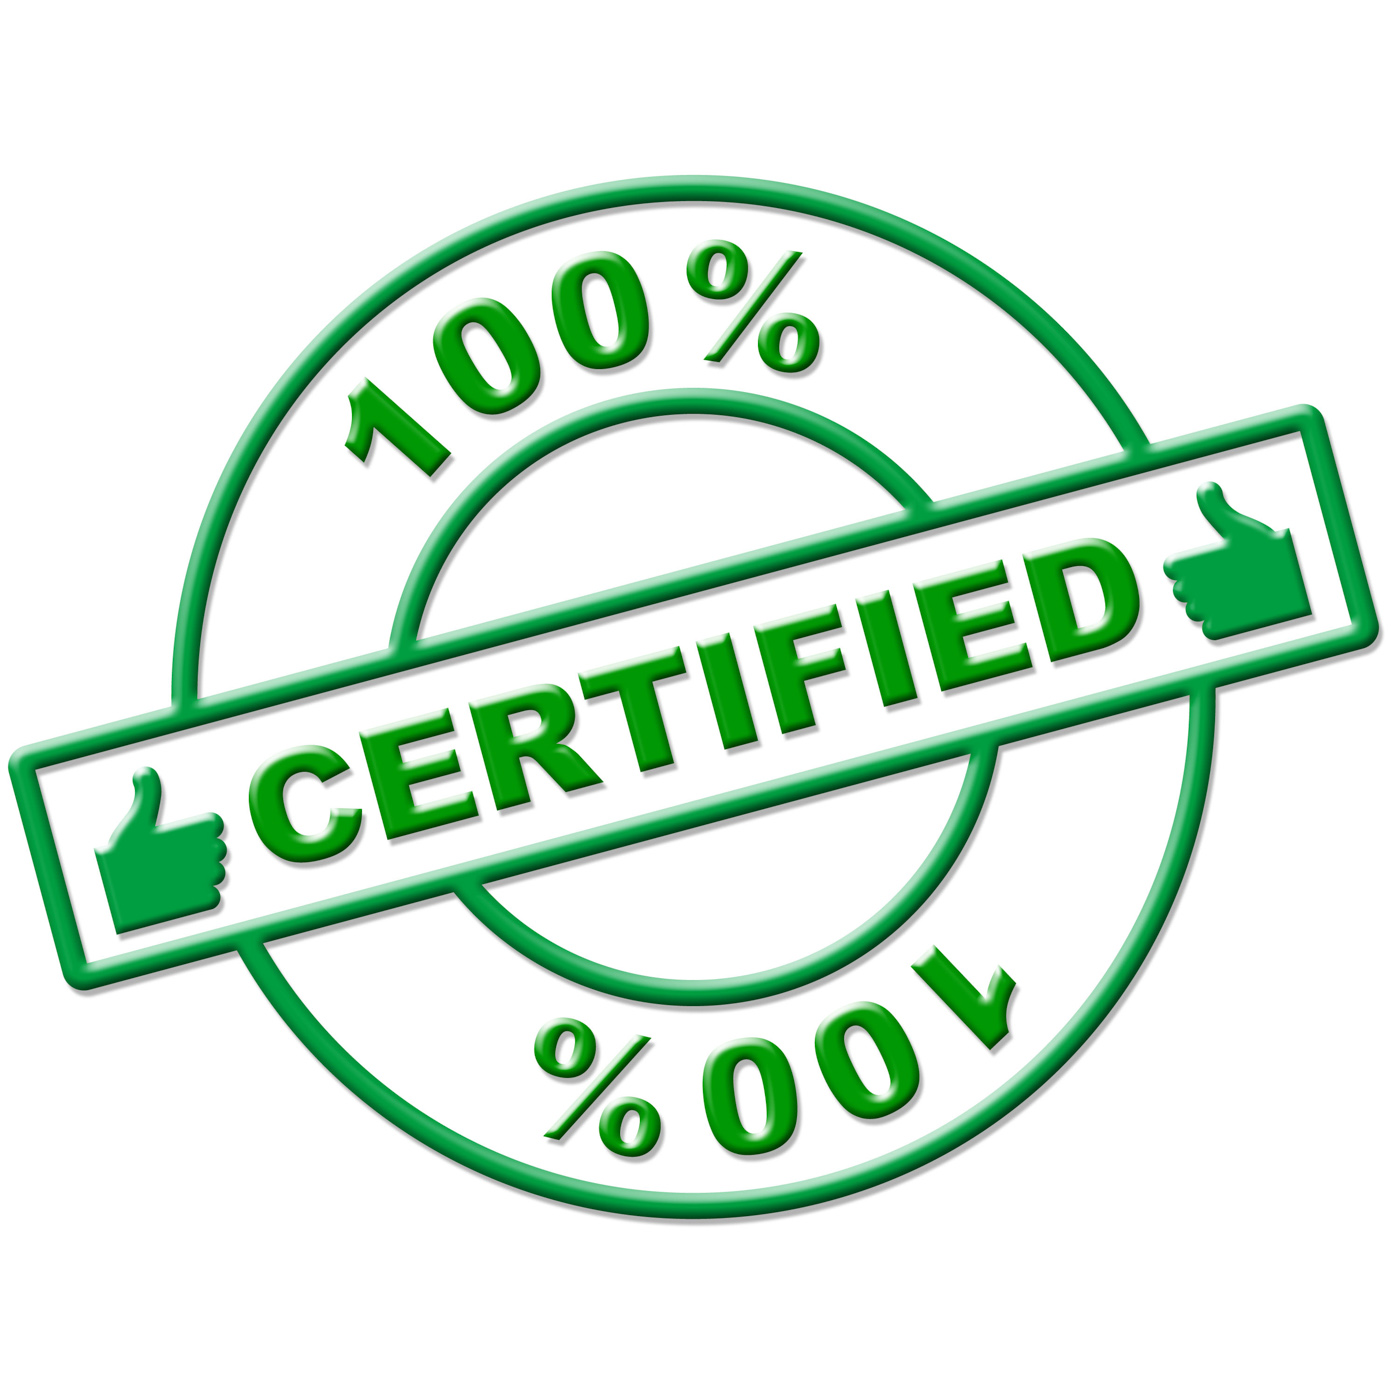 Hundred percent certified indicates authenticate absolute and verify photo